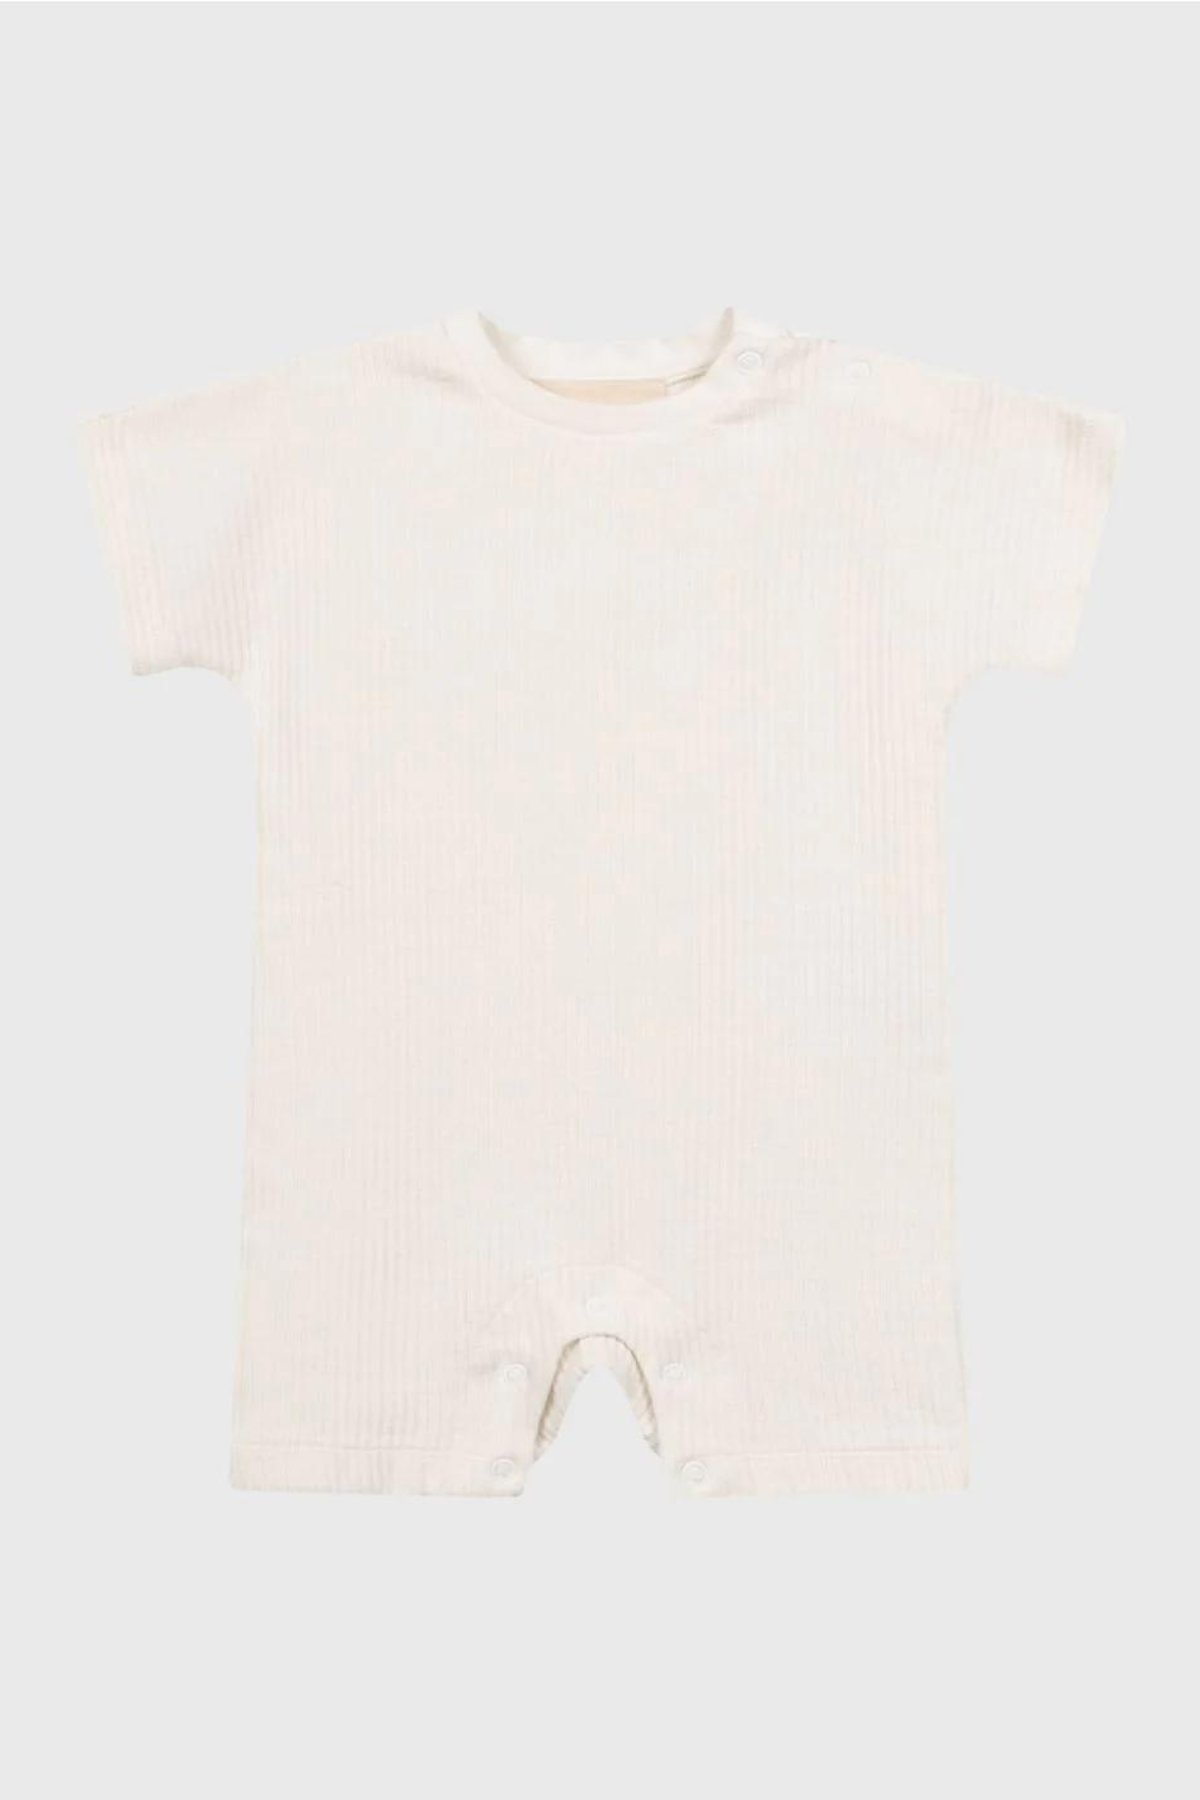 RIBBED ROMPER BABY - SYNCSON